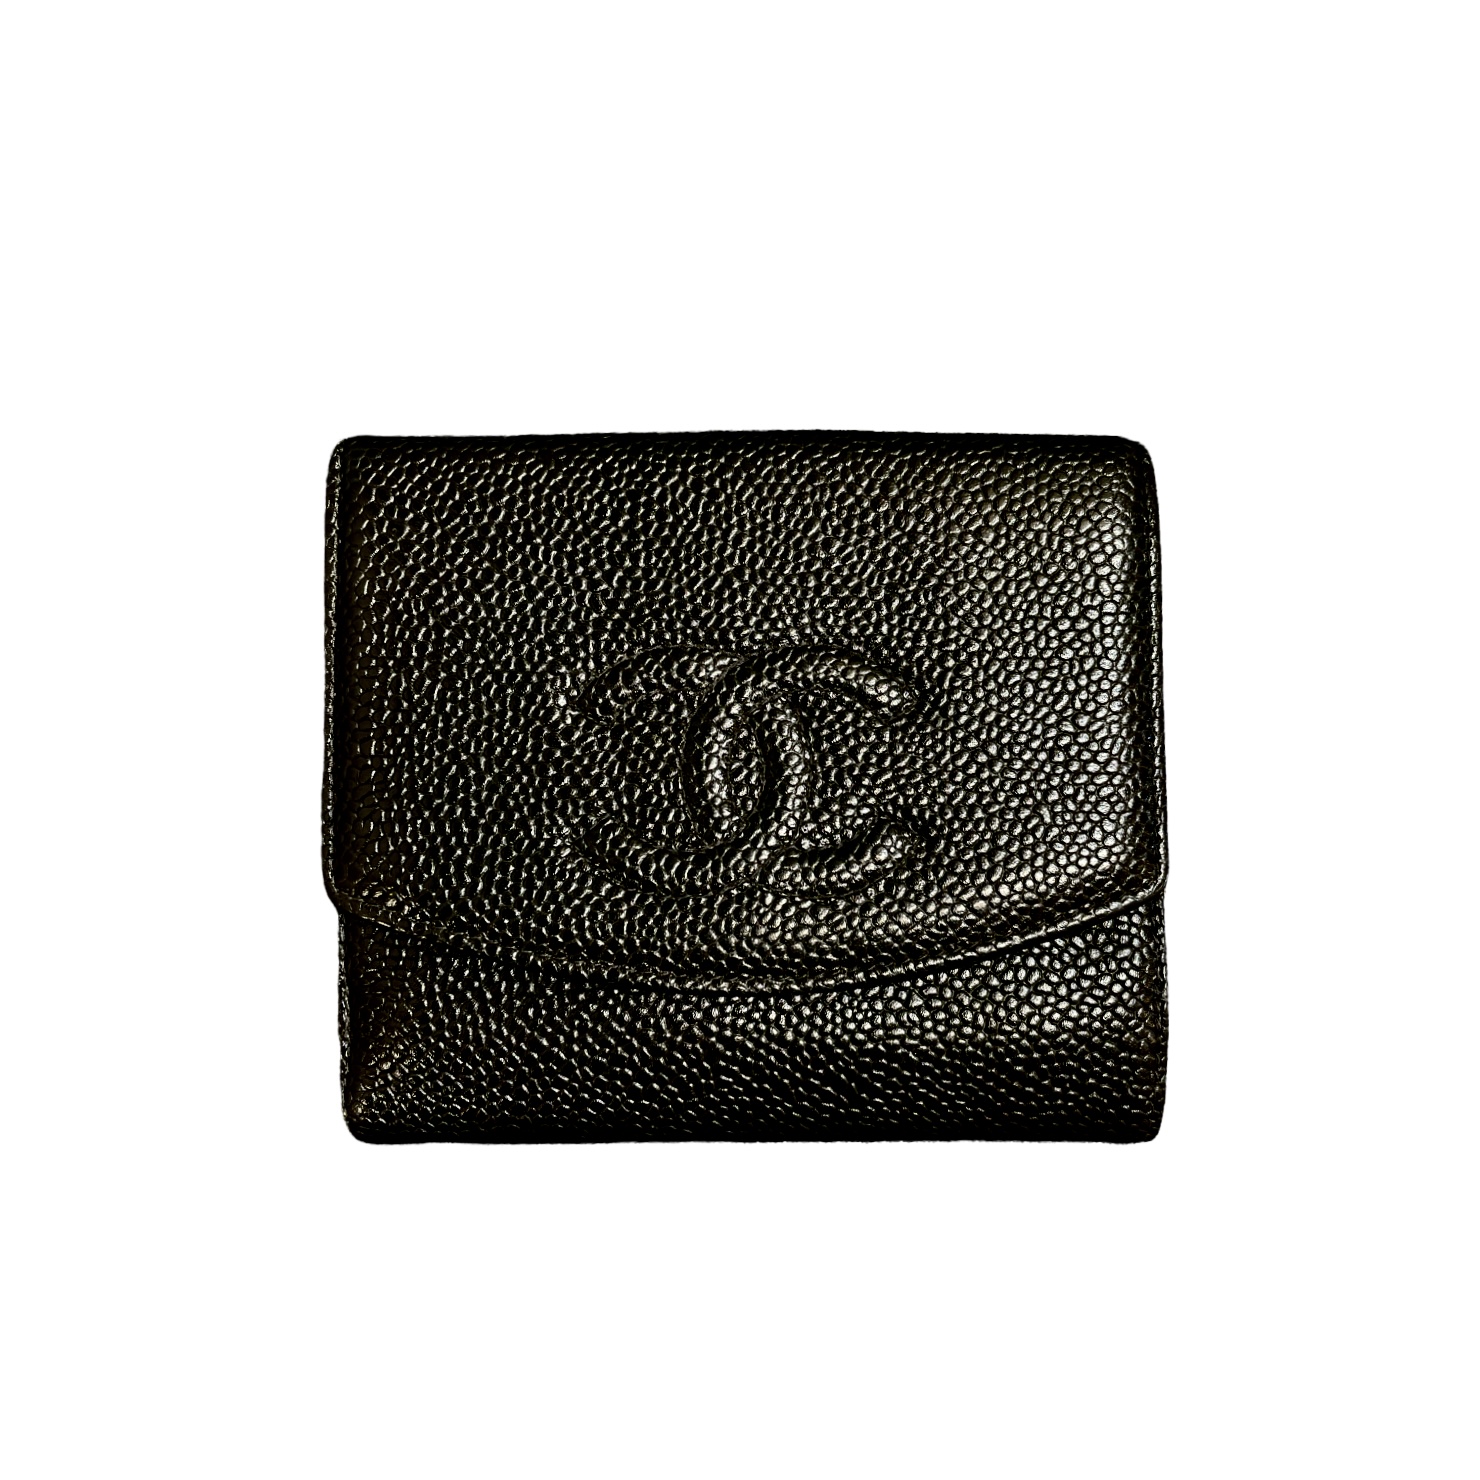 Chanel Caviar Timeless Compact Wallet, $349.99